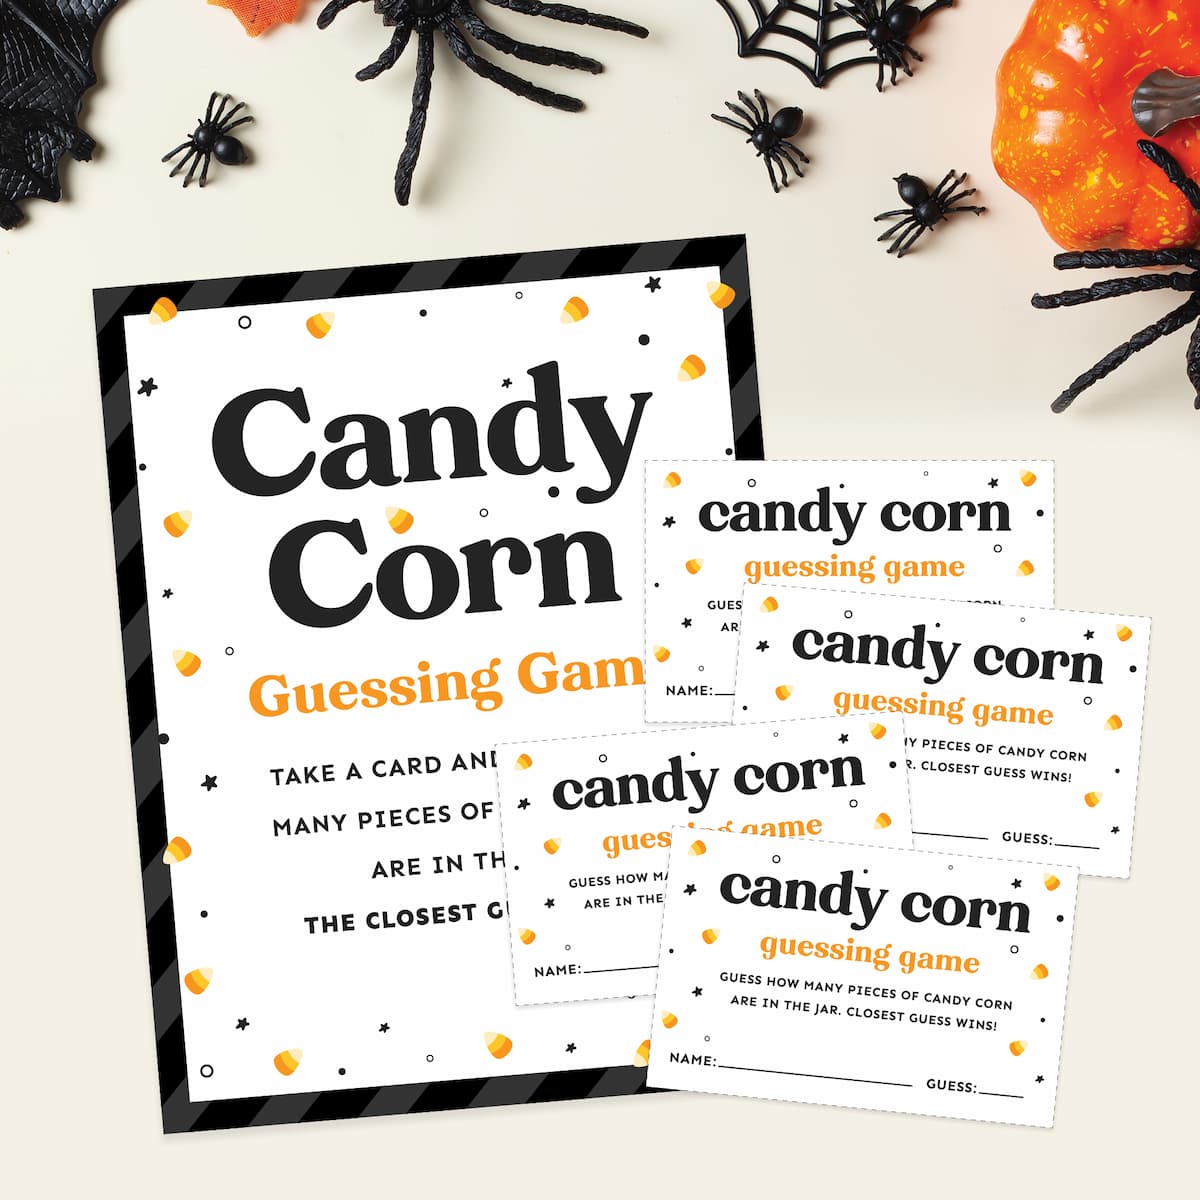 Free printable candy corn guessing game.